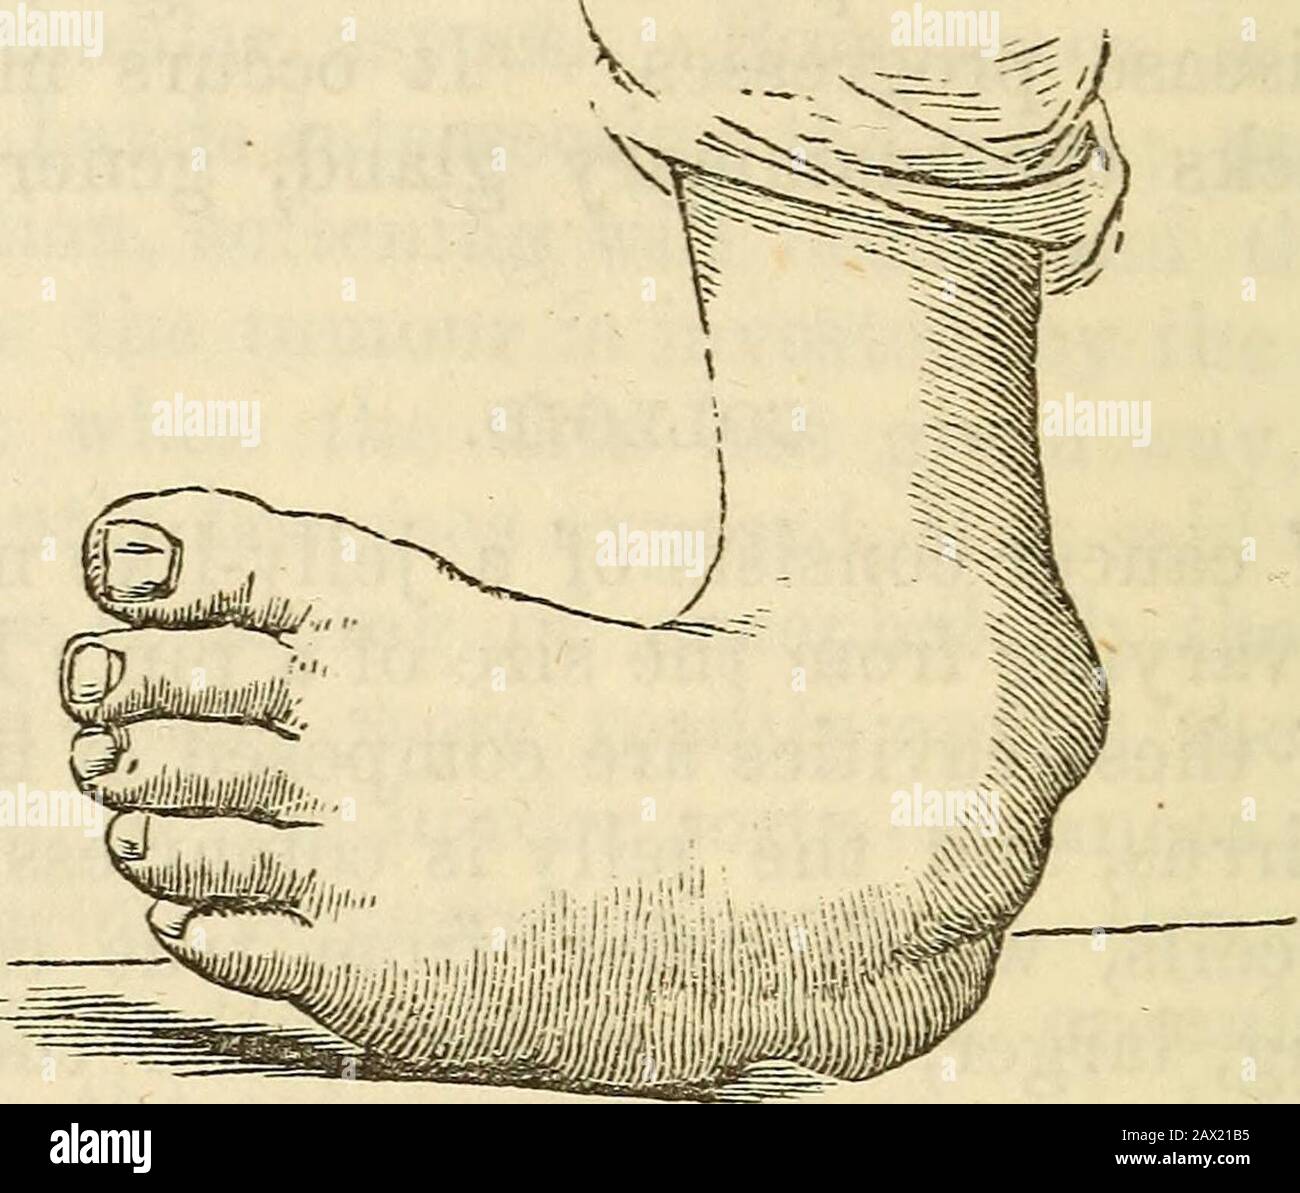 A Hand Book Of Surgery With Fifty Illustrations Ectic Club Foot This Deformity May Be Either Congenital Or Acquired The Con Genital Form Is Dependent Upon Some Disturbance Of The Cerebro Spinal System That Produces